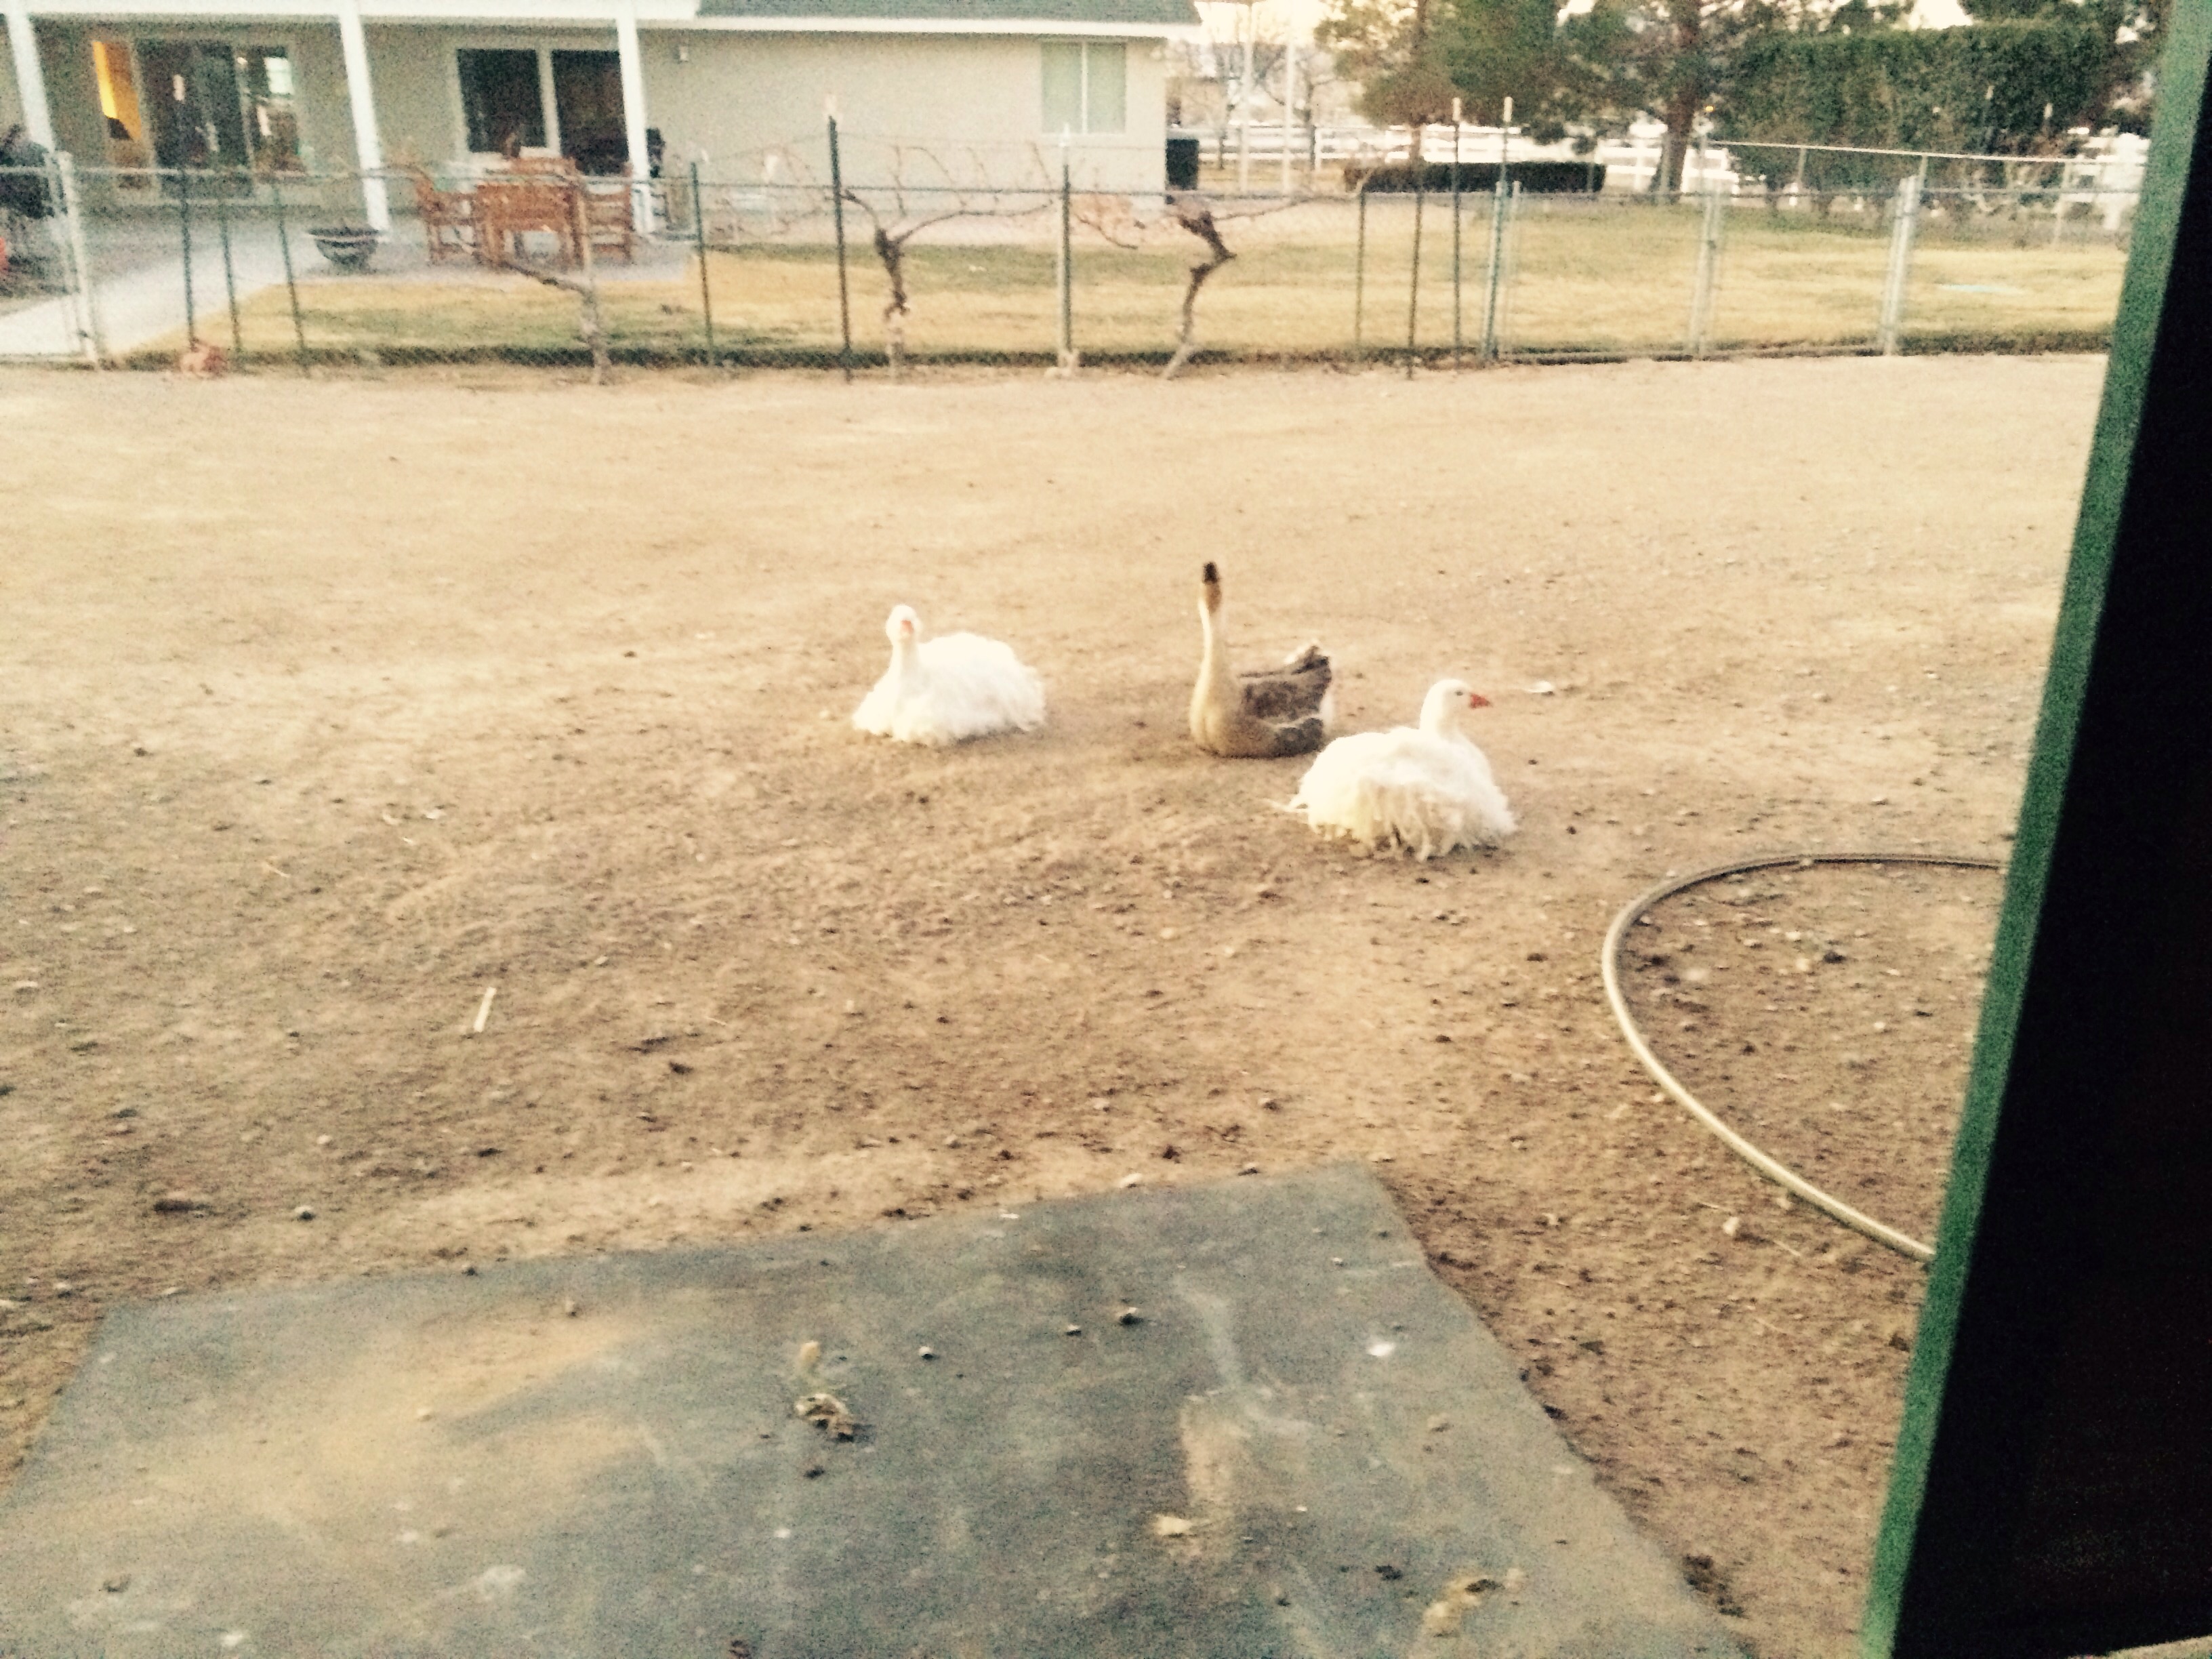 Harold the African goose has been on the farm for 17 years and has been attacked at least two times by coyotes he has been our gaurd and was very happy Frizzel and frazel came to the farm two years ago our farm vet told us geese live 30 years and have photo traffic memories 